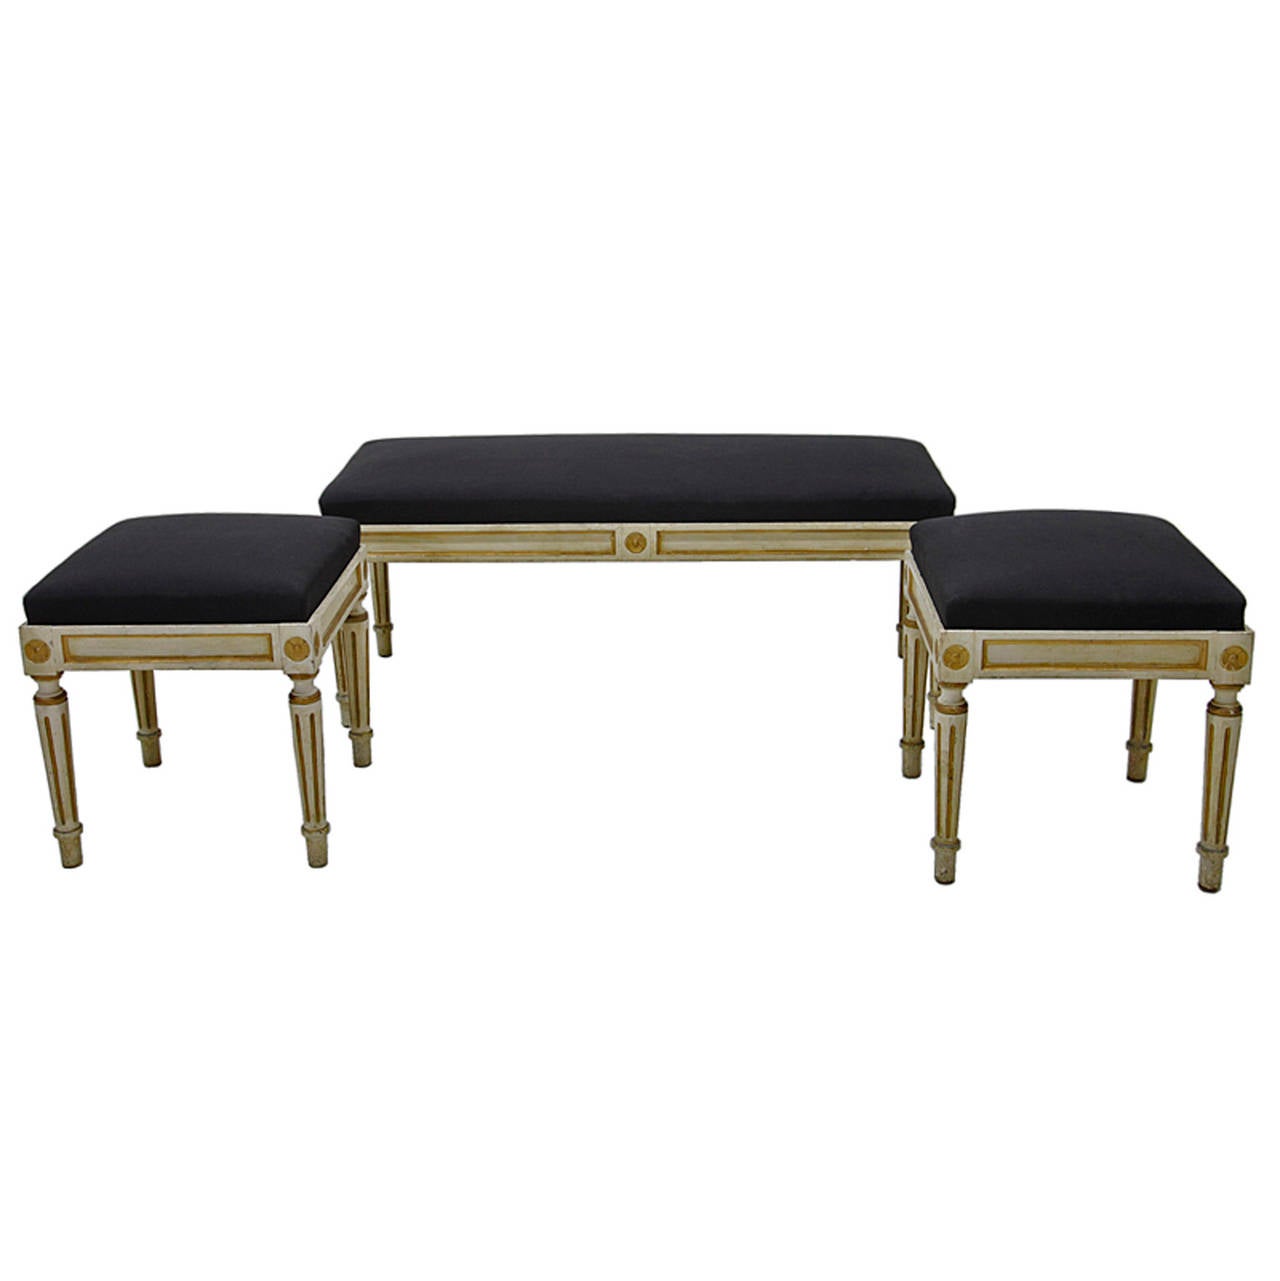 Wonderful pair of  french Stool and Bench in Louis-Seize style, golden painted, dating from the 1880´s.
Dimension Bench: HxWxD: 20.1 x 47.2 x 17.7 inches (51 x 120 x 45 cm)
Dimension Stool: HxWxD: 20.1 x 17.7 x 17.7 inches (51 x 45 x 45 cm)